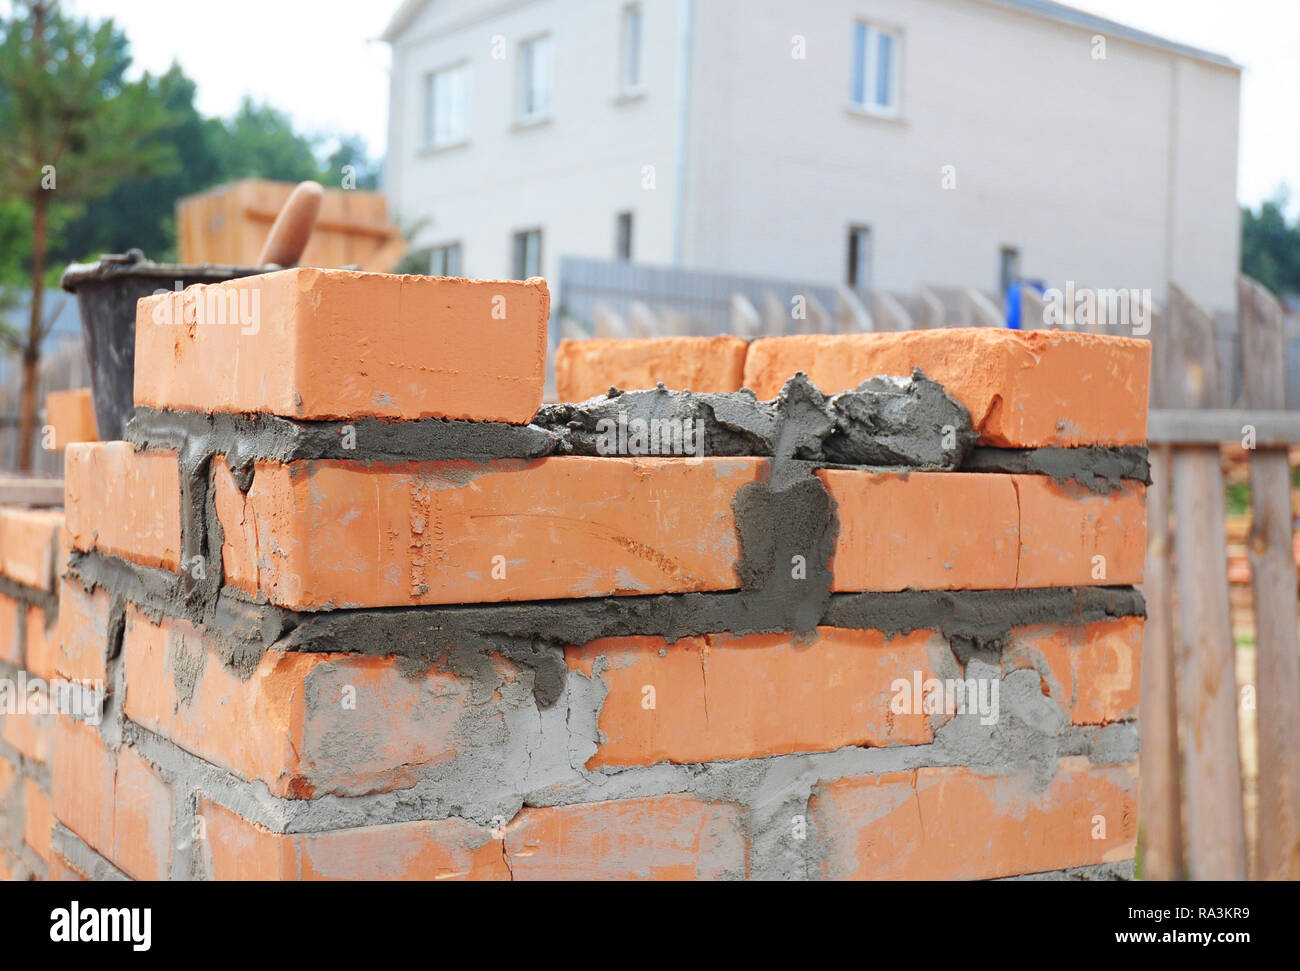 Bricklaying house brick wall. Close up on laying bricks with concrete. Stock Photo